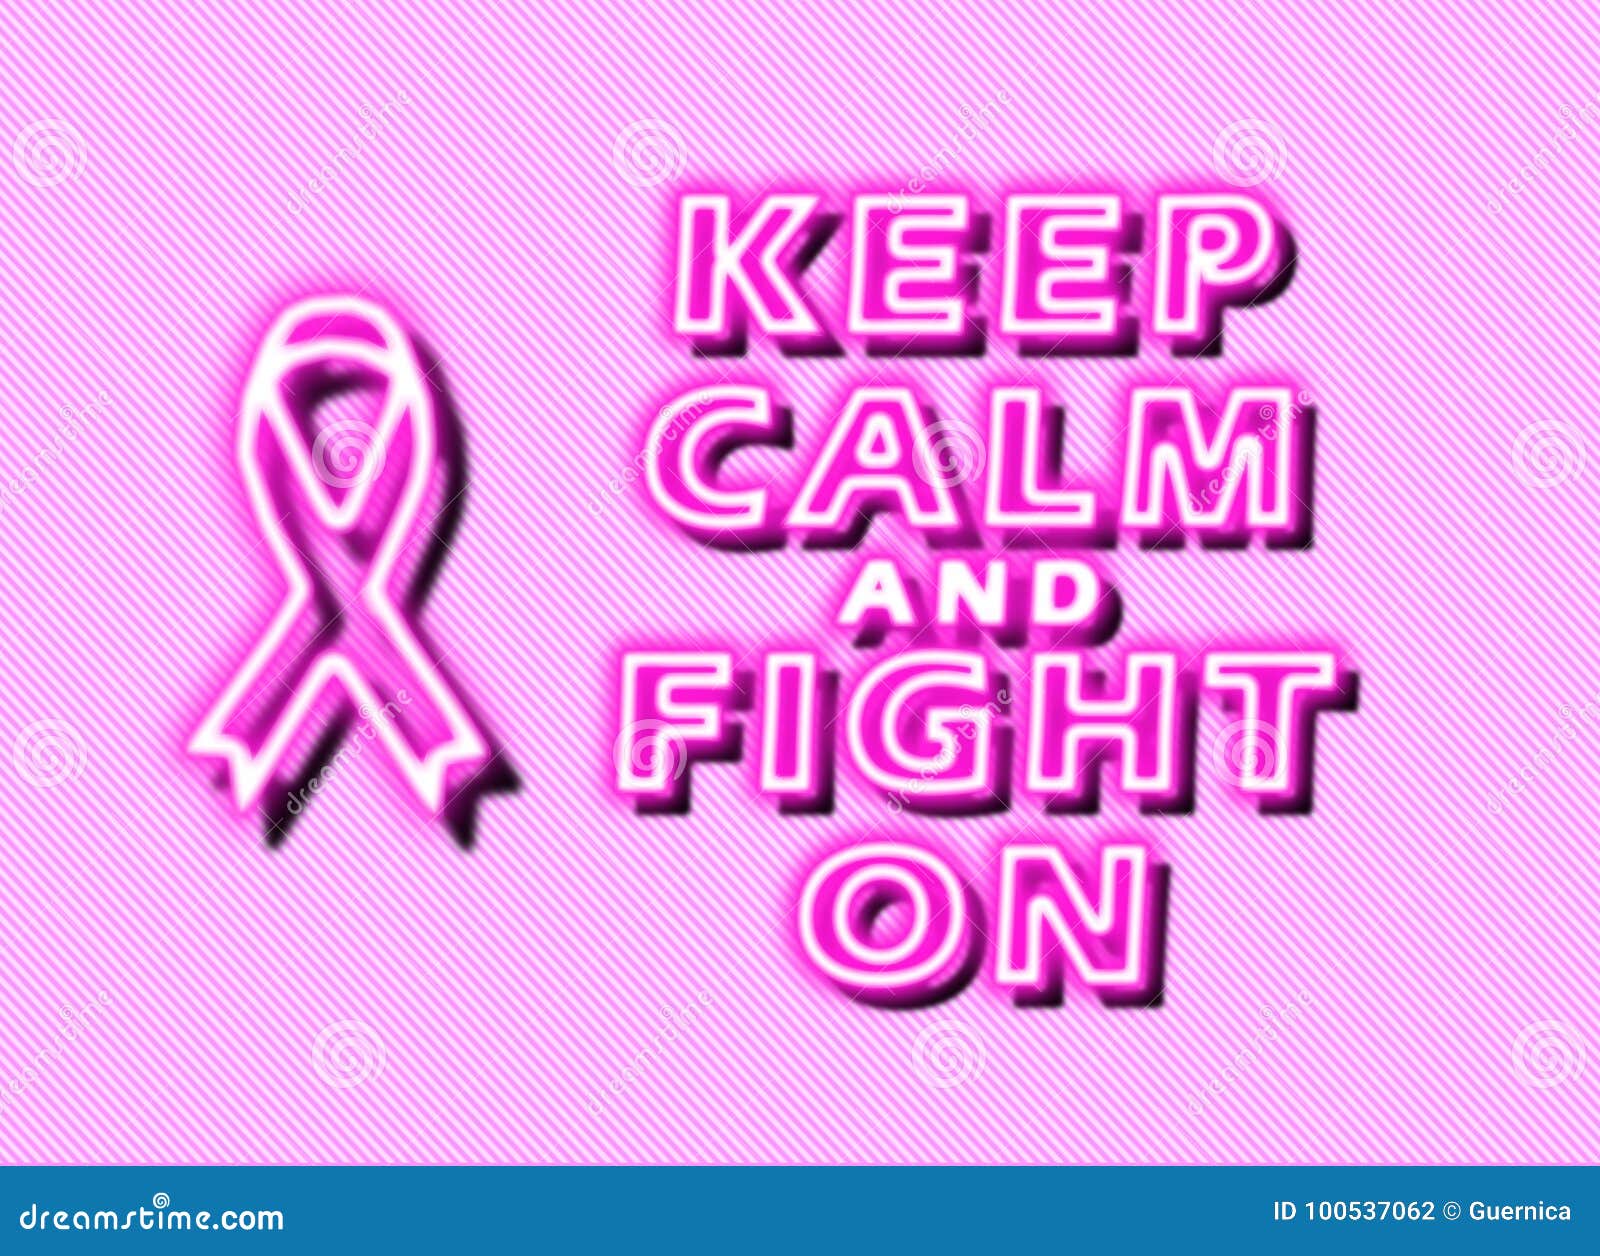 Keep Calm And Fight On Breast Cancer Stock Illustration